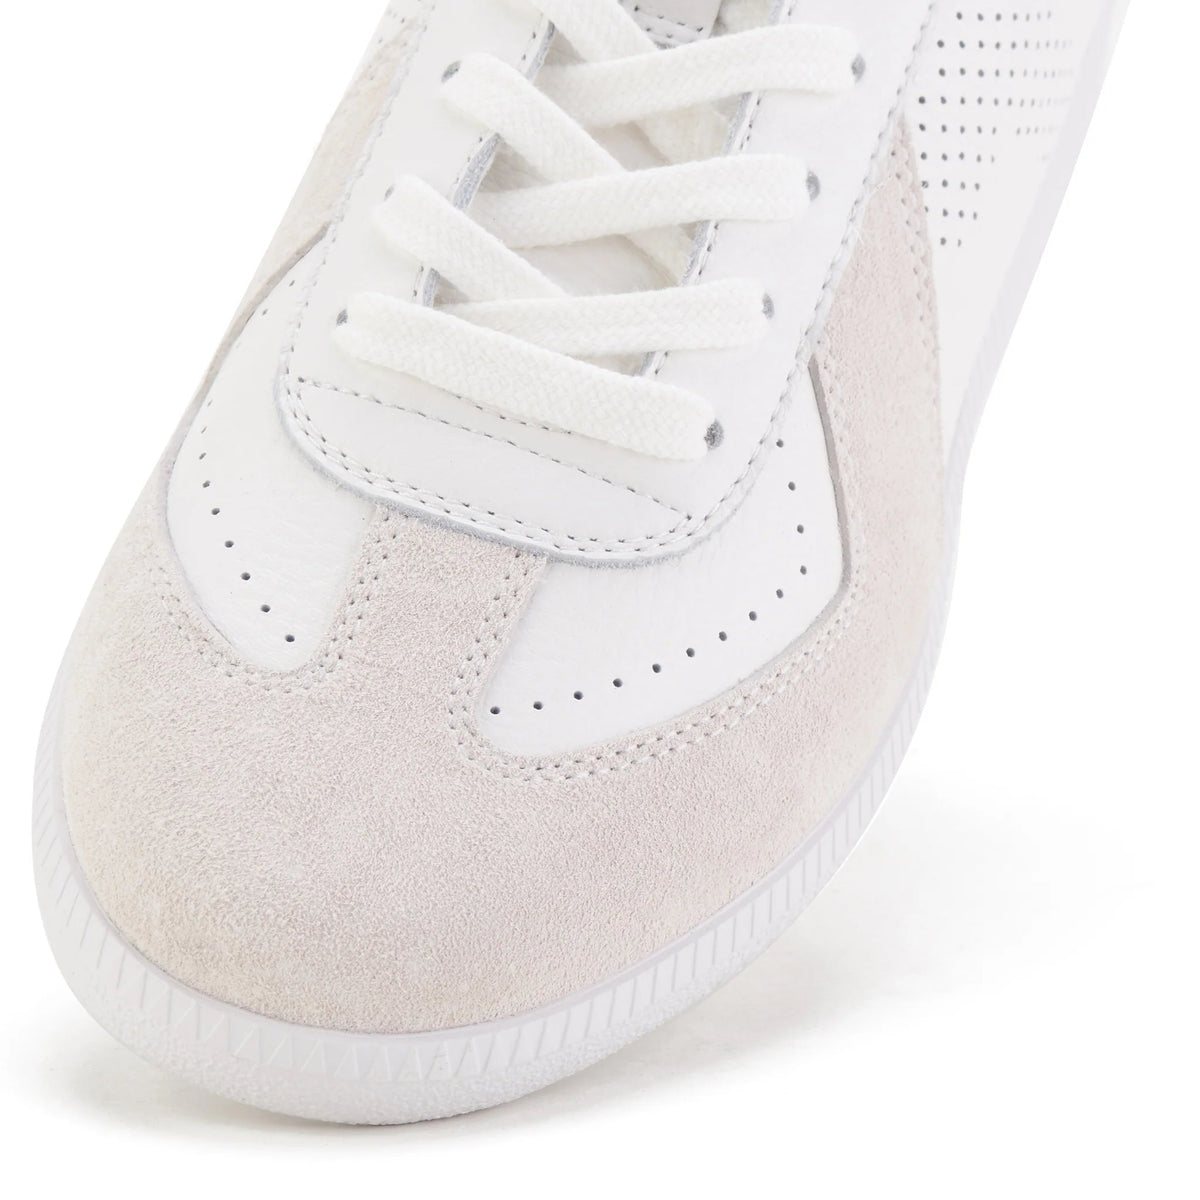 Pace White/Green Sneaker - Sare StoreRollie NationShoes